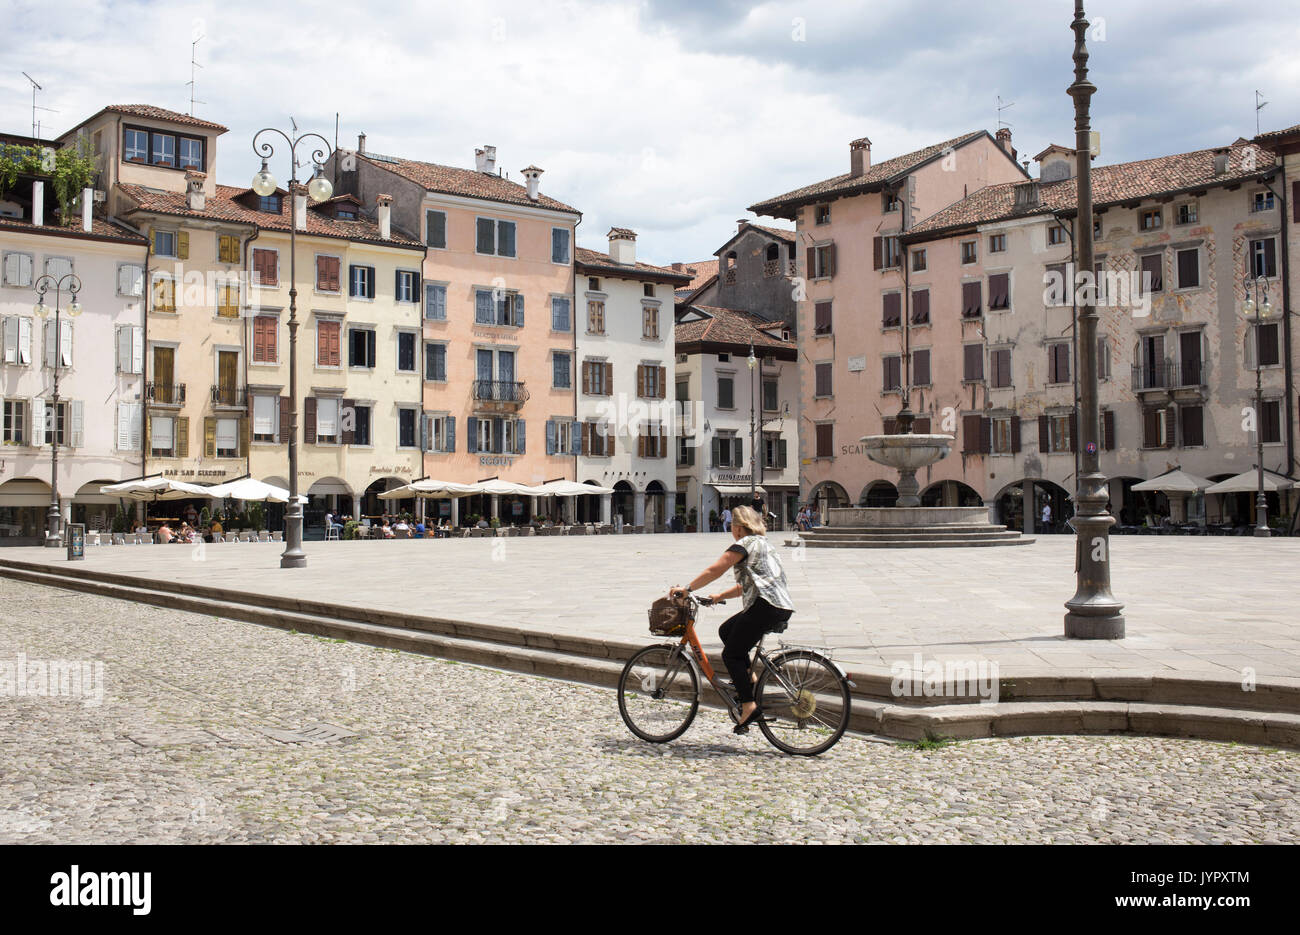 Piazza Matteotti is the main central square in Udine. Stock Photo